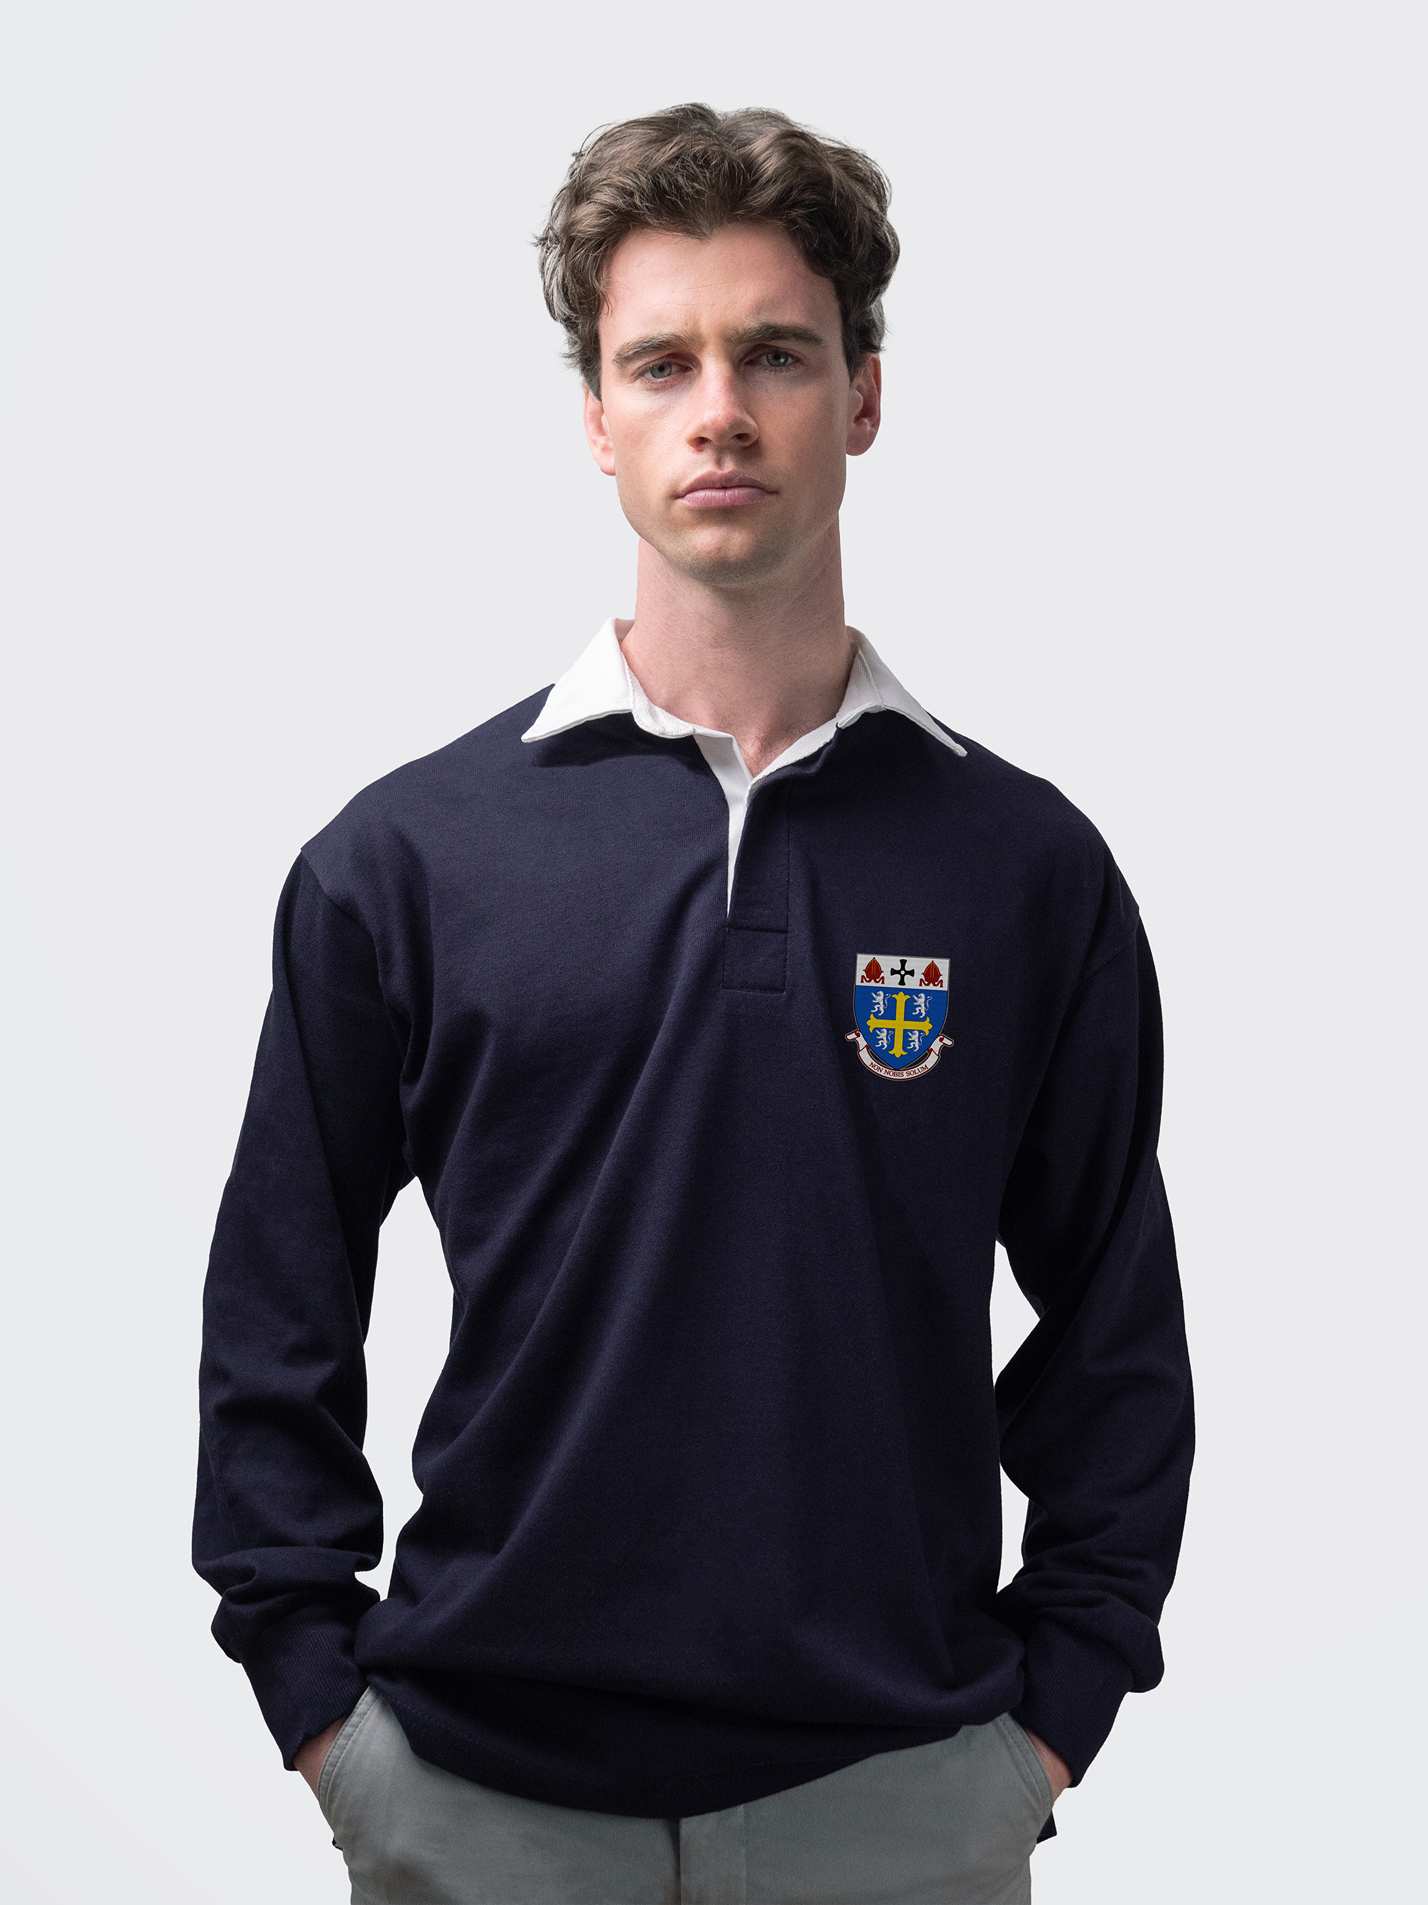 University College student wearing an embroidered mens rugby shirt in navy